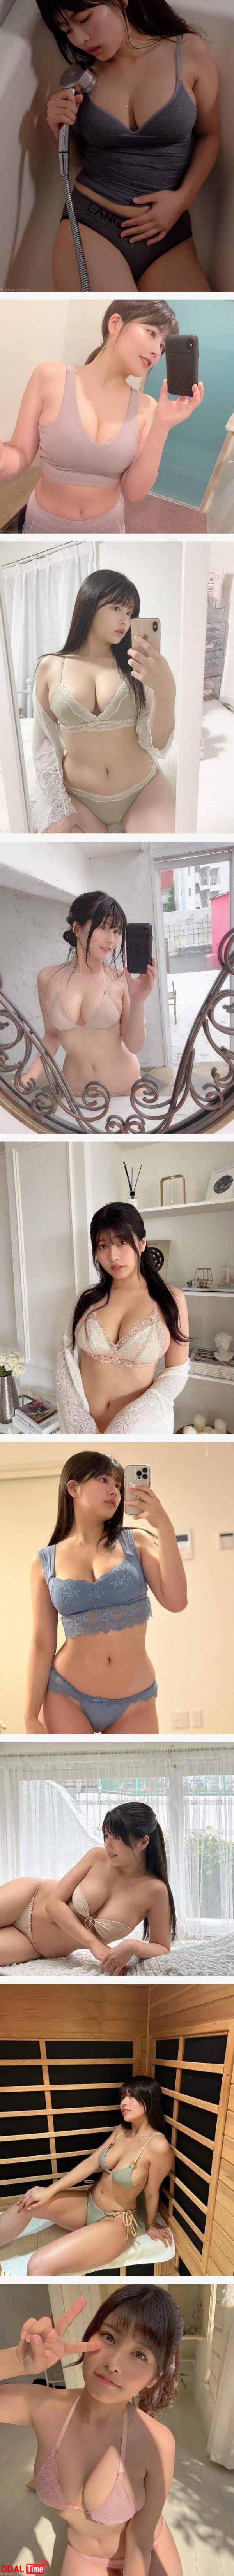 Yookduk gravure model, which is popular these days